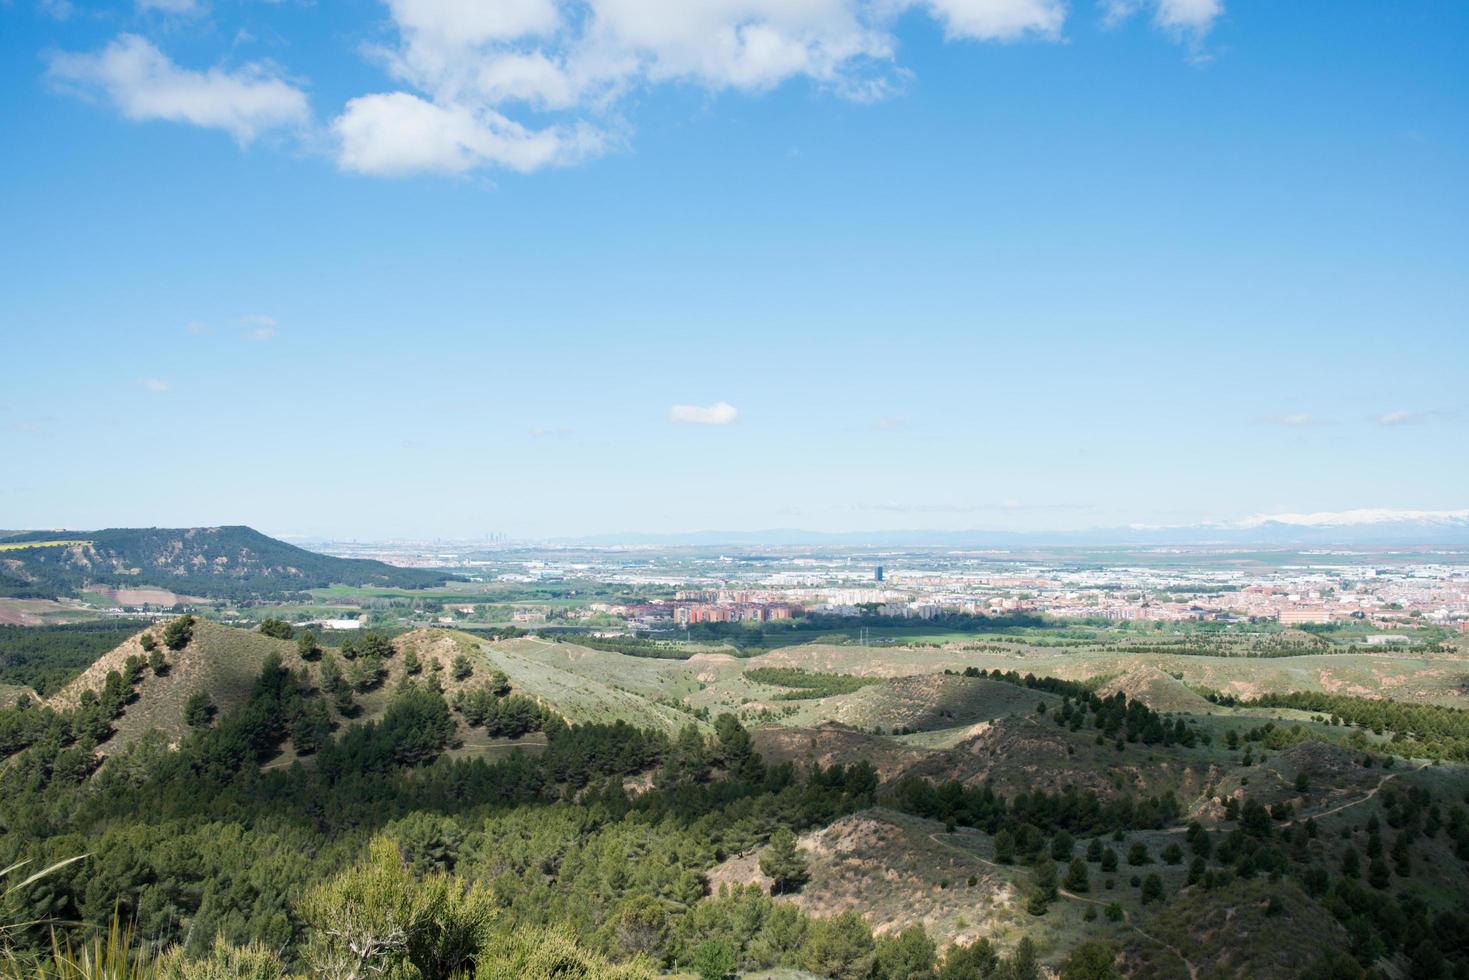 Beautiful landscape from a hill at Los Cerros Park, in Alcala de Henares. View of Madrid skyline and mountains with snow in the distance. Madrid photo